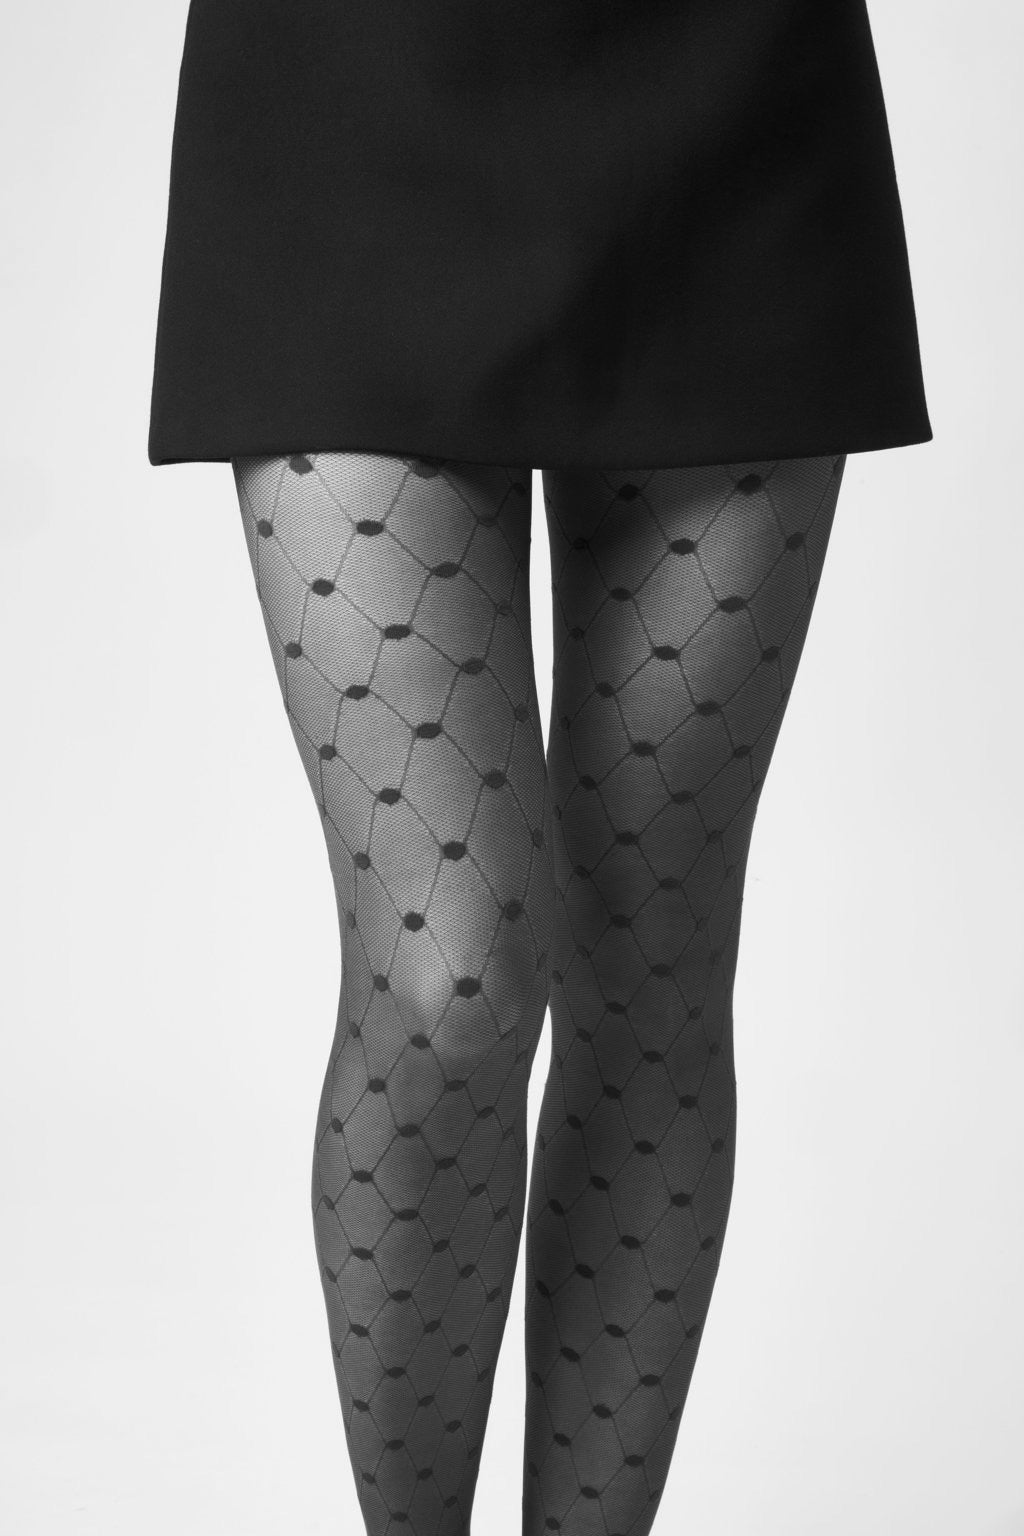 SiSi Spider Collant - Sheer black fashion tights with an all over enclosed fishnet and spot style pattern, seamless panty brief.